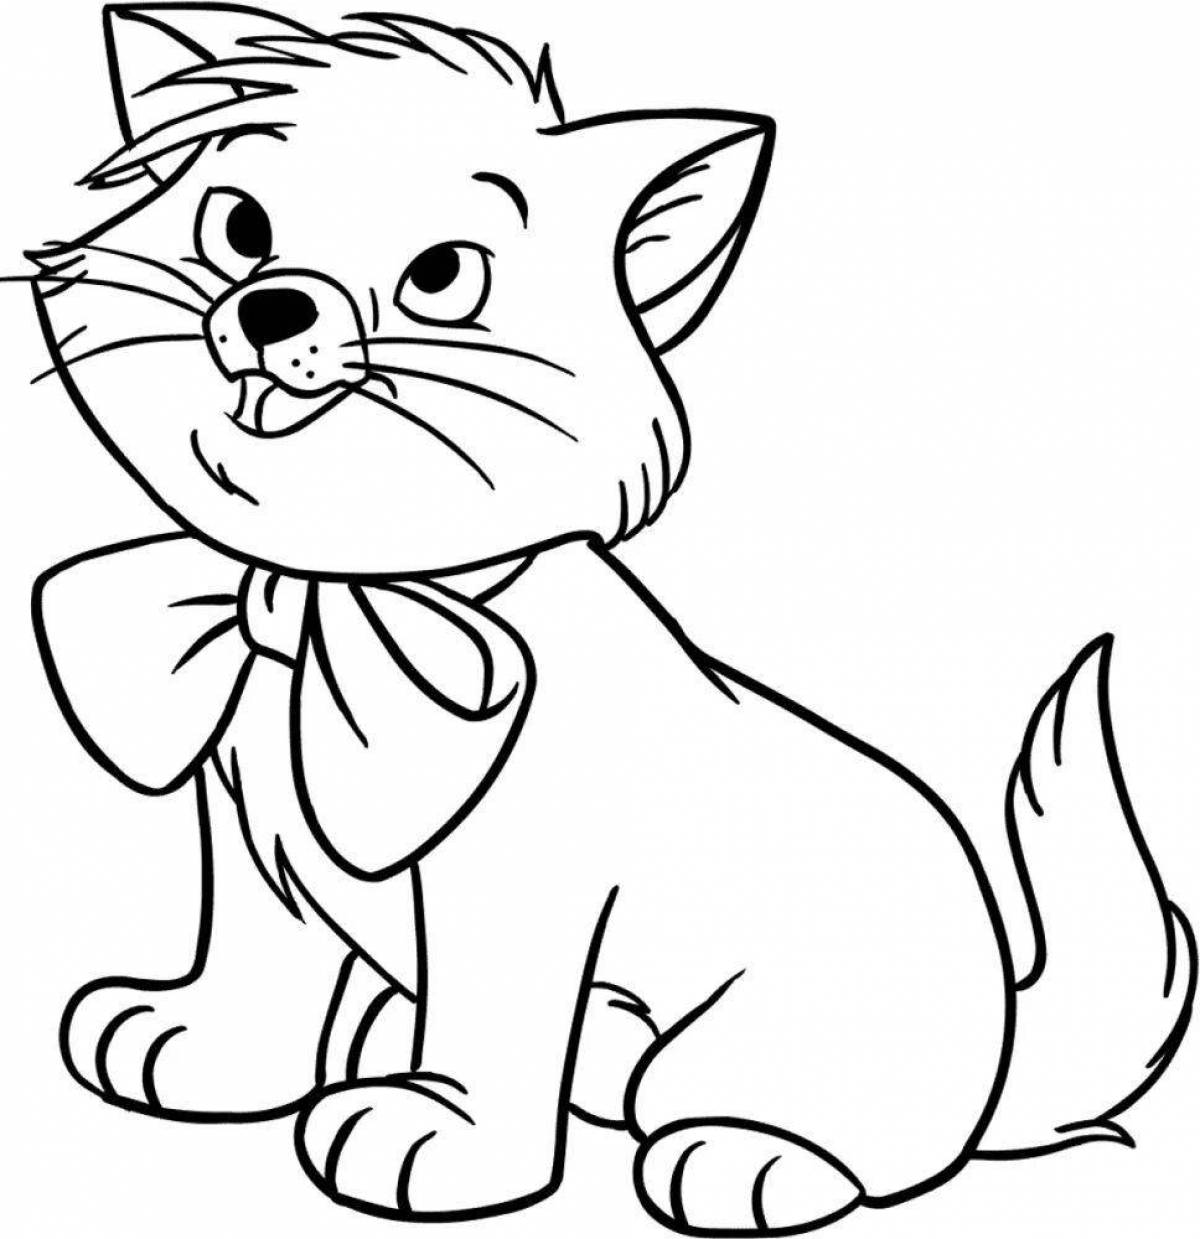 Coloring book with bright eyes of a kitten for children